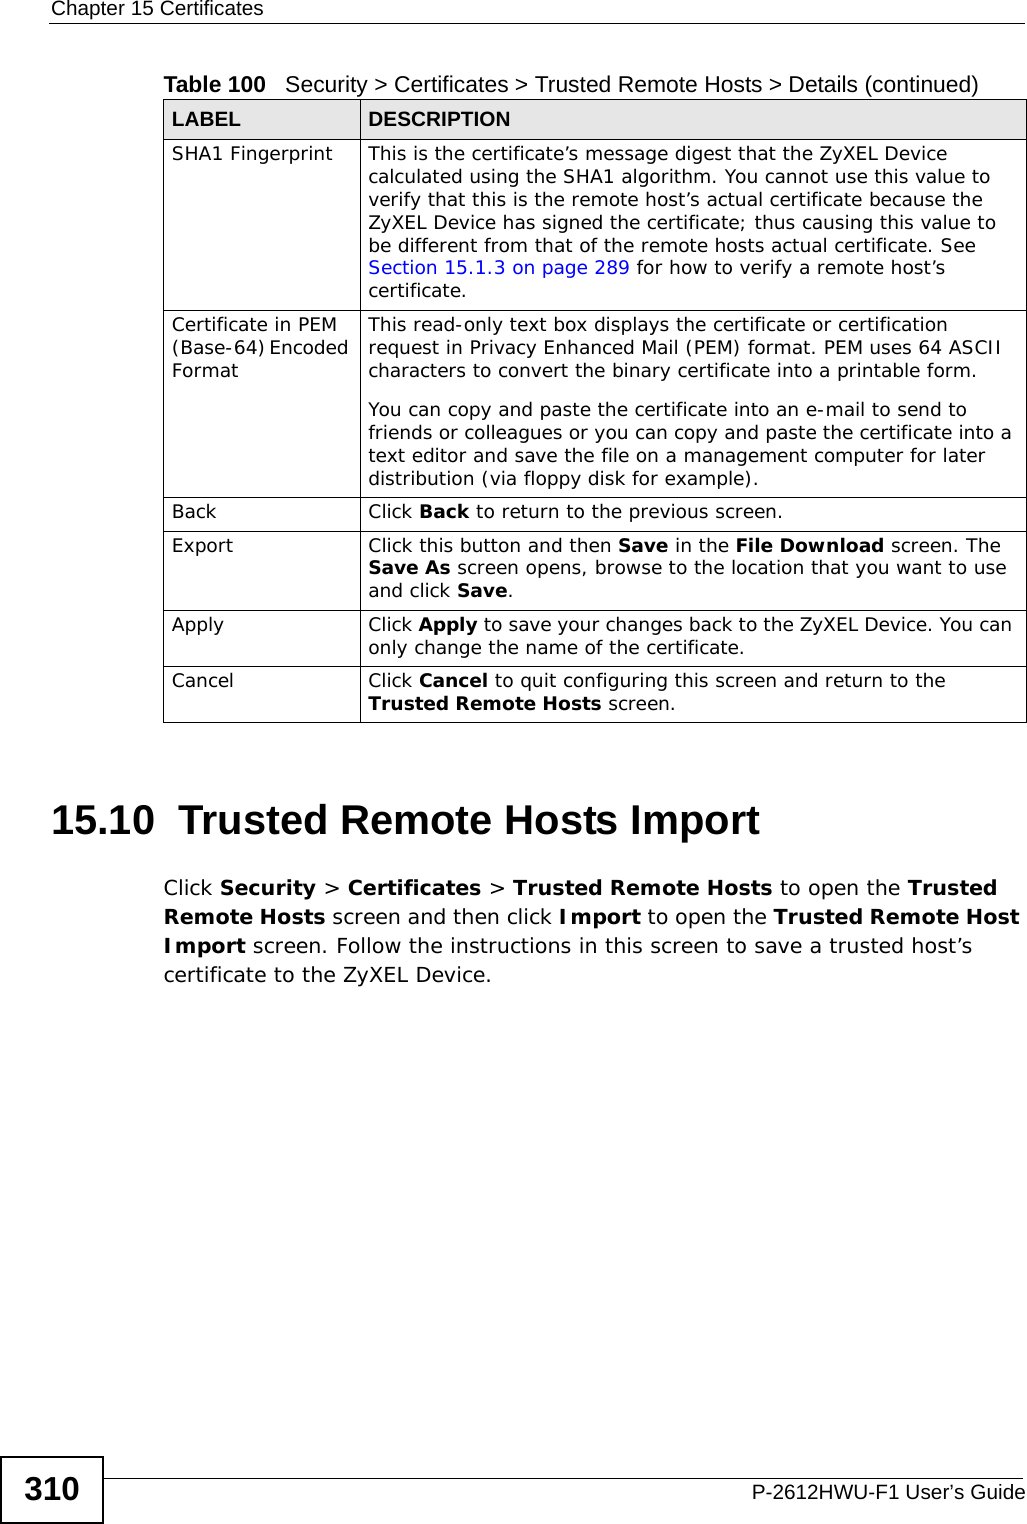 Chapter 15 CertificatesP-2612HWU-F1 User’s Guide31015.10  Trusted Remote Hosts Import   Click Security &gt; Certificates &gt; Trusted Remote Hosts to open the Trusted Remote Hosts screen and then click Import to open the Trusted Remote Host Import screen. Follow the instructions in this screen to save a trusted host’s certificate to the ZyXEL Device.SHA1 Fingerprint This is the certificate’s message digest that the ZyXEL Device calculated using the SHA1 algorithm. You cannot use this value to verify that this is the remote host’s actual certificate because the ZyXEL Device has signed the certificate; thus causing this value to be different from that of the remote hosts actual certificate. See Section 15.1.3 on page 289 for how to verify a remote host’s certificate.Certificate in PEM (Base-64) Encoded FormatThis read-only text box displays the certificate or certification request in Privacy Enhanced Mail (PEM) format. PEM uses 64 ASCII characters to convert the binary certificate into a printable form. You can copy and paste the certificate into an e-mail to send to friends or colleagues or you can copy and paste the certificate into a text editor and save the file on a management computer for later distribution (via floppy disk for example).Back Click Back to return to the previous screen.Export Click this button and then Save in the File Download screen. The Save As screen opens, browse to the location that you want to use and click Save.Apply Click Apply to save your changes back to the ZyXEL Device. You can only change the name of the certificate.Cancel Click Cancel to quit configuring this screen and return to the Trusted Remote Hosts screen.Table 100   Security &gt; Certificates &gt; Trusted Remote Hosts &gt; Details (continued)LABEL DESCRIPTION